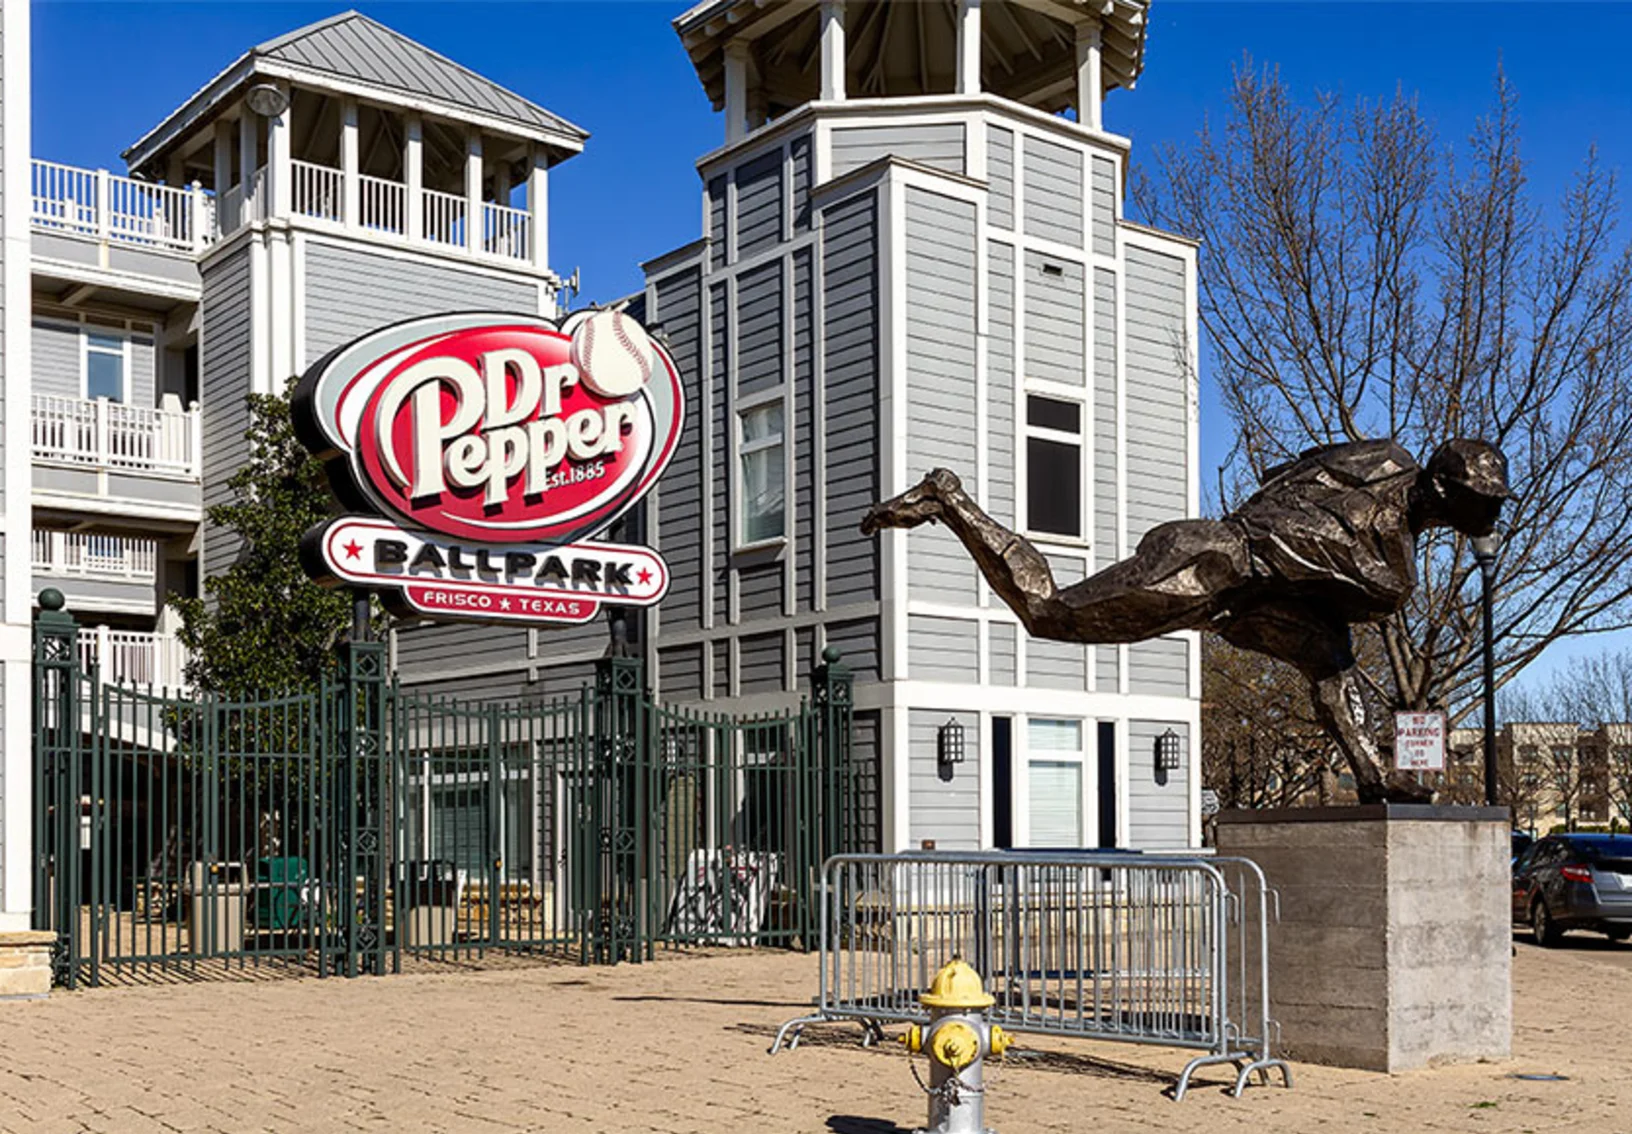 Dr. Pepper Ballpark Entrance with Statue in Frisco, TX